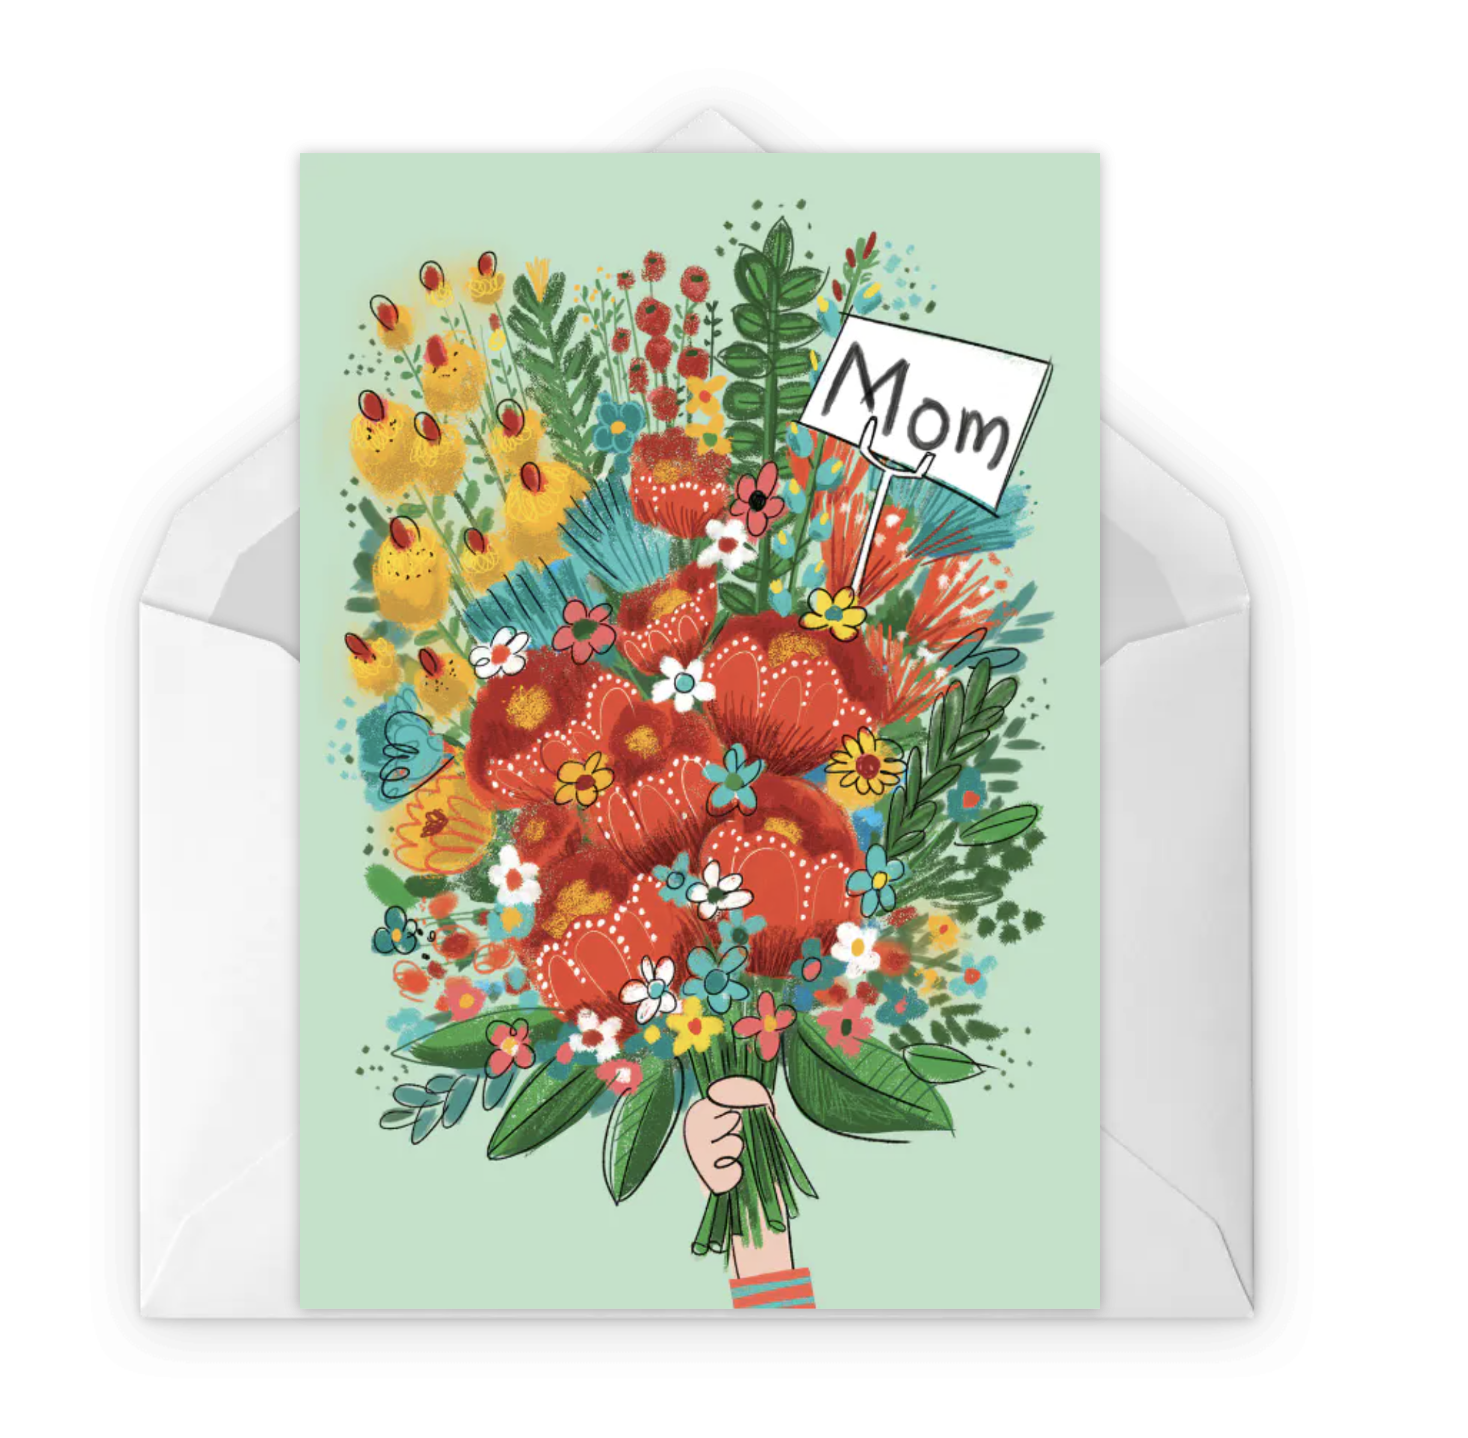 appreciate-your-being-there-spanish-language-thank-you-card-greeting